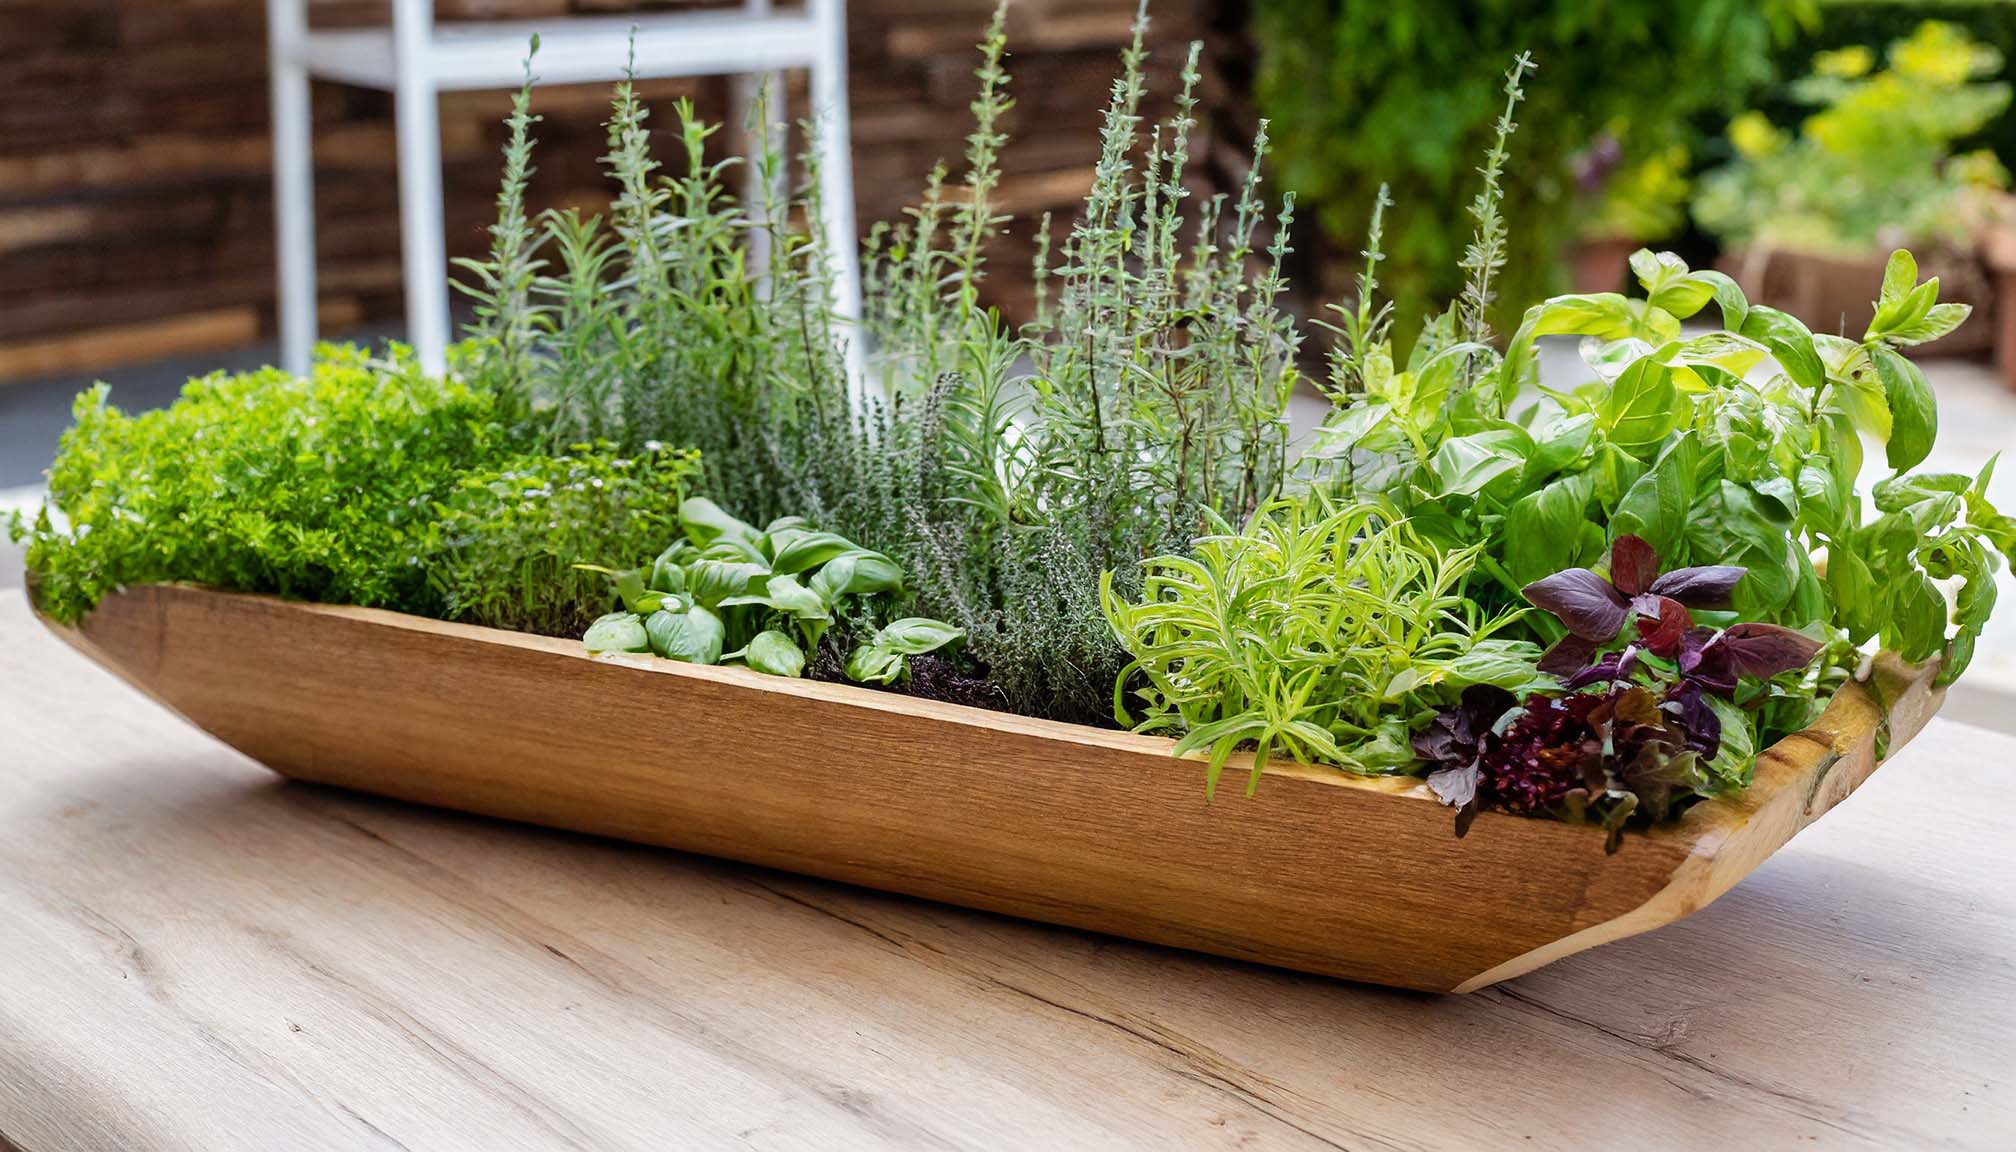 Wooden dough bowl filled with plants and herbs on outdoor wooden table.